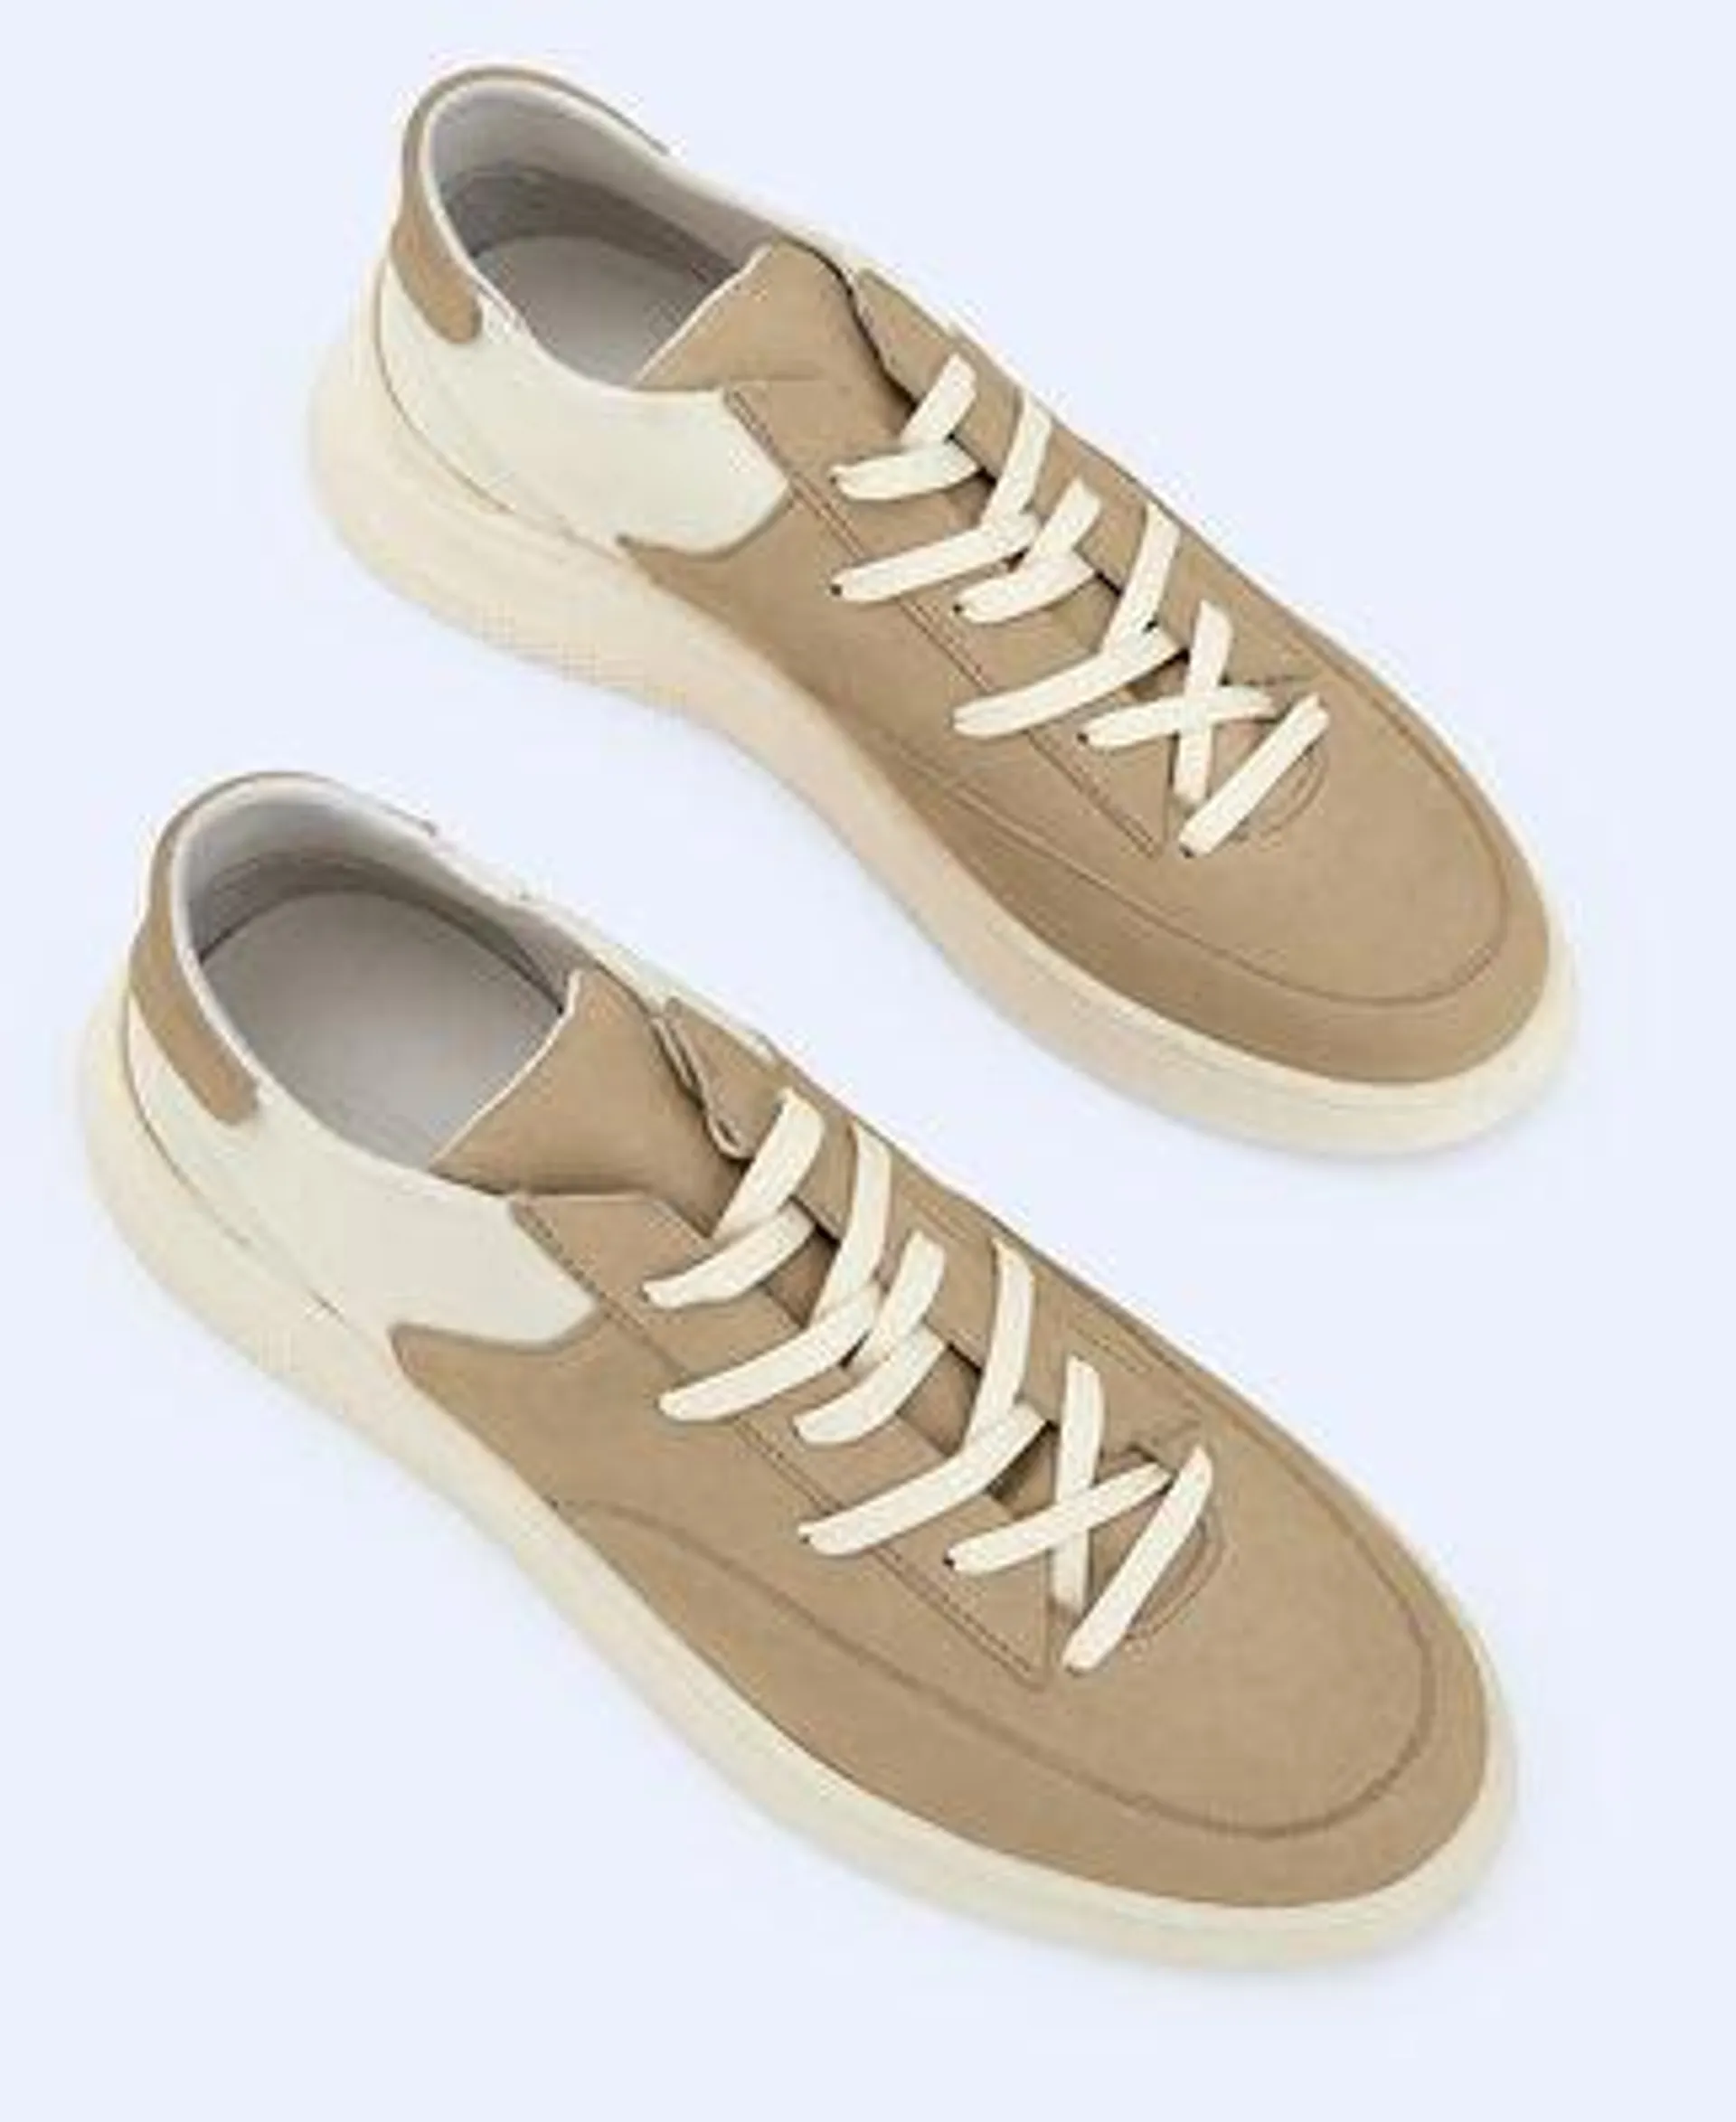 Leather and neoprene sneaker.